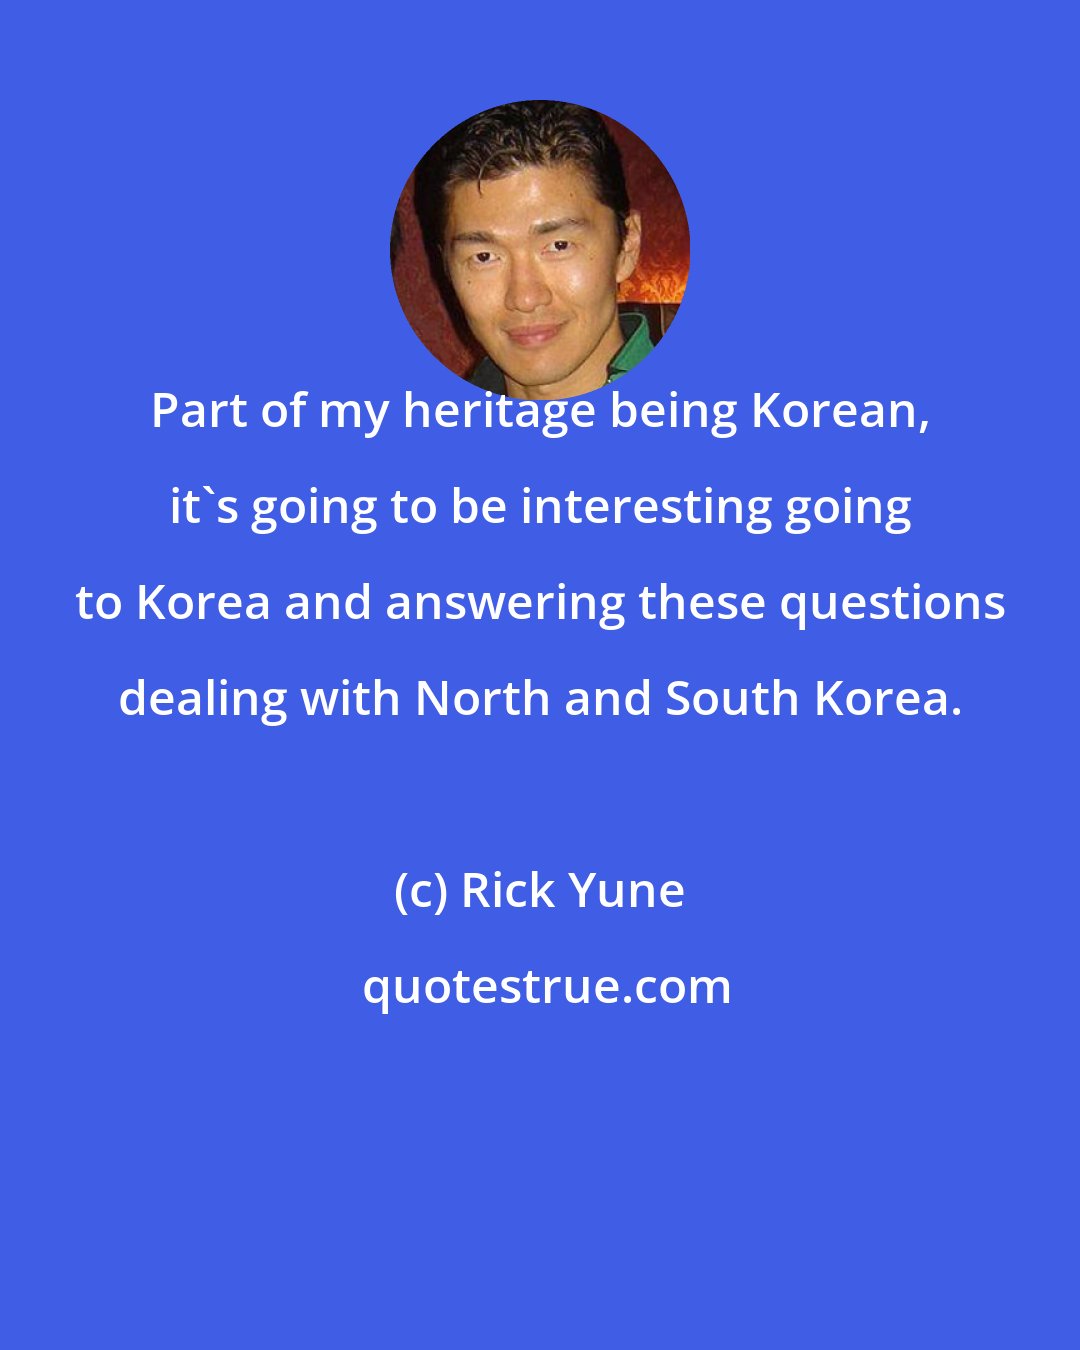 Rick Yune: Part of my heritage being Korean, it's going to be interesting going to Korea and answering these questions dealing with North and South Korea.